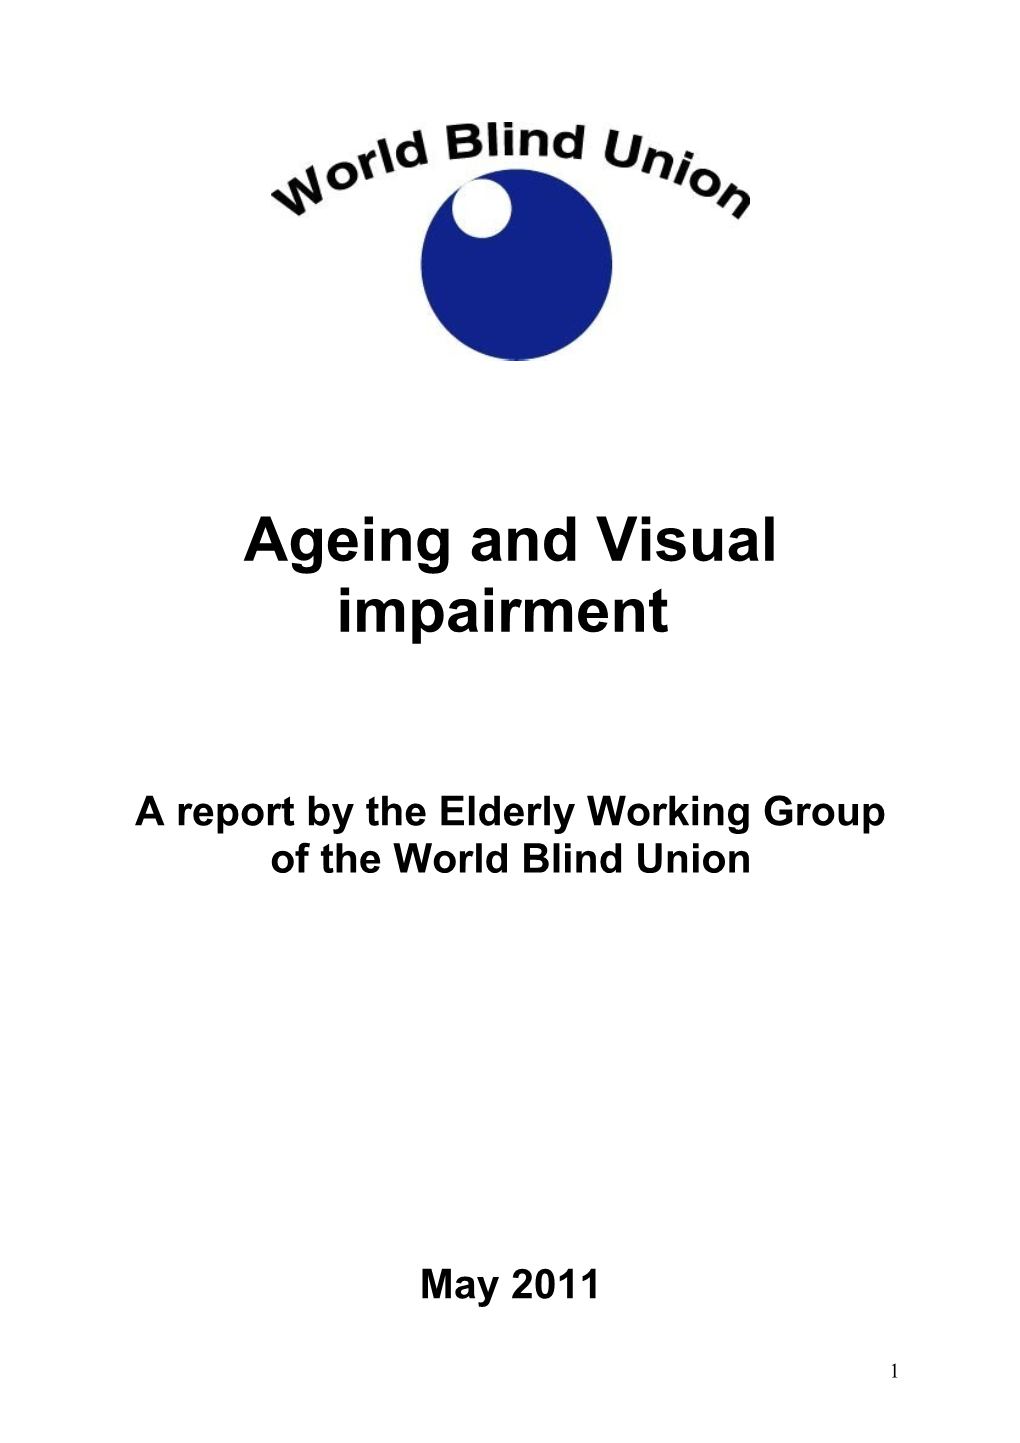 Ageing and Visual Impairment in Europe